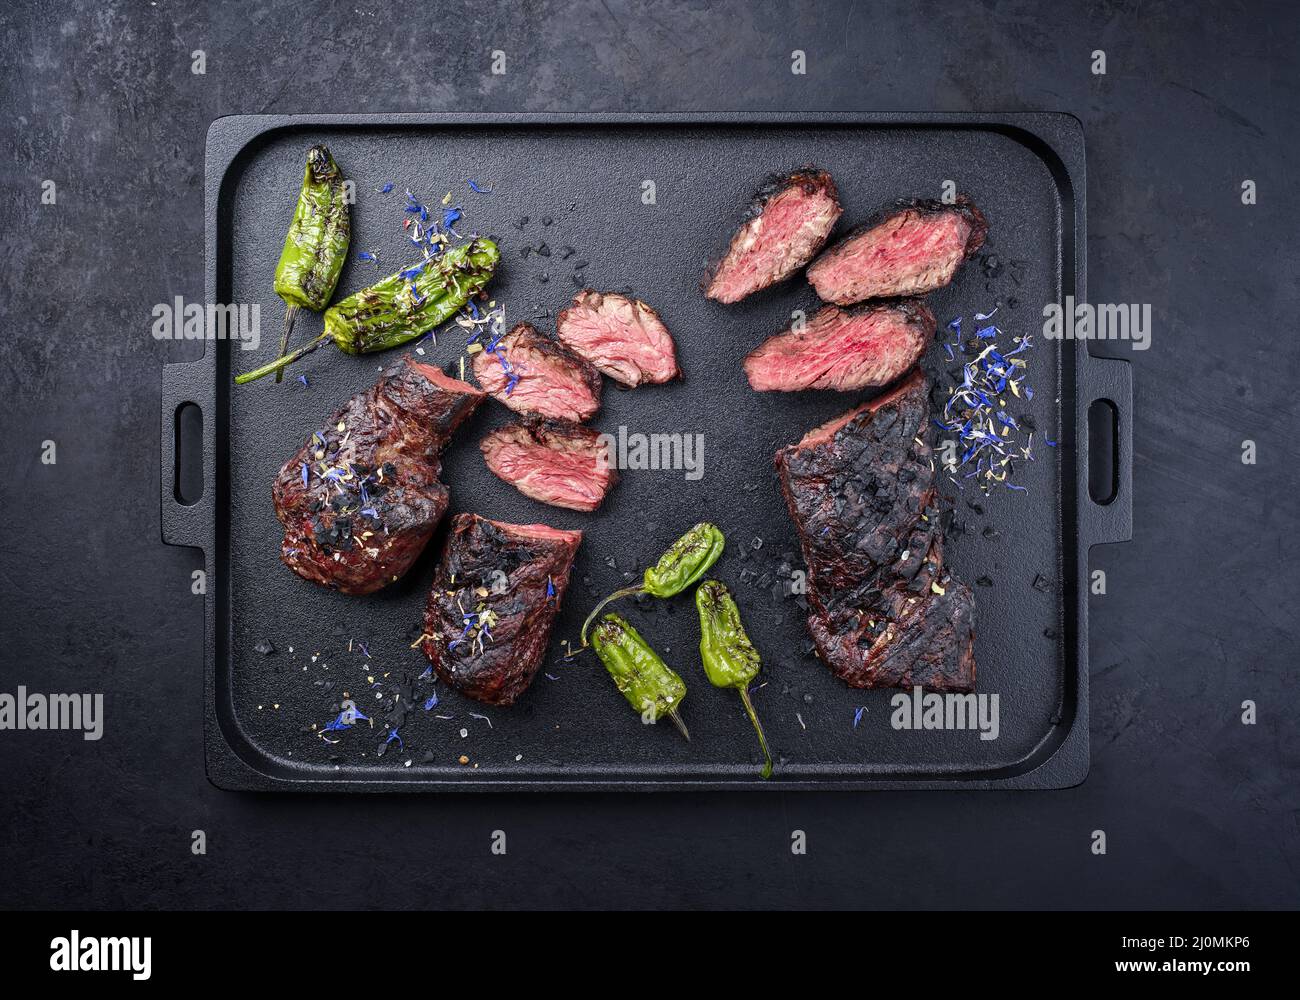 Modern style traditional barbecue wagyu onglet steak with green chili and spices served as top view on a design cast-iron tray Stock Photo